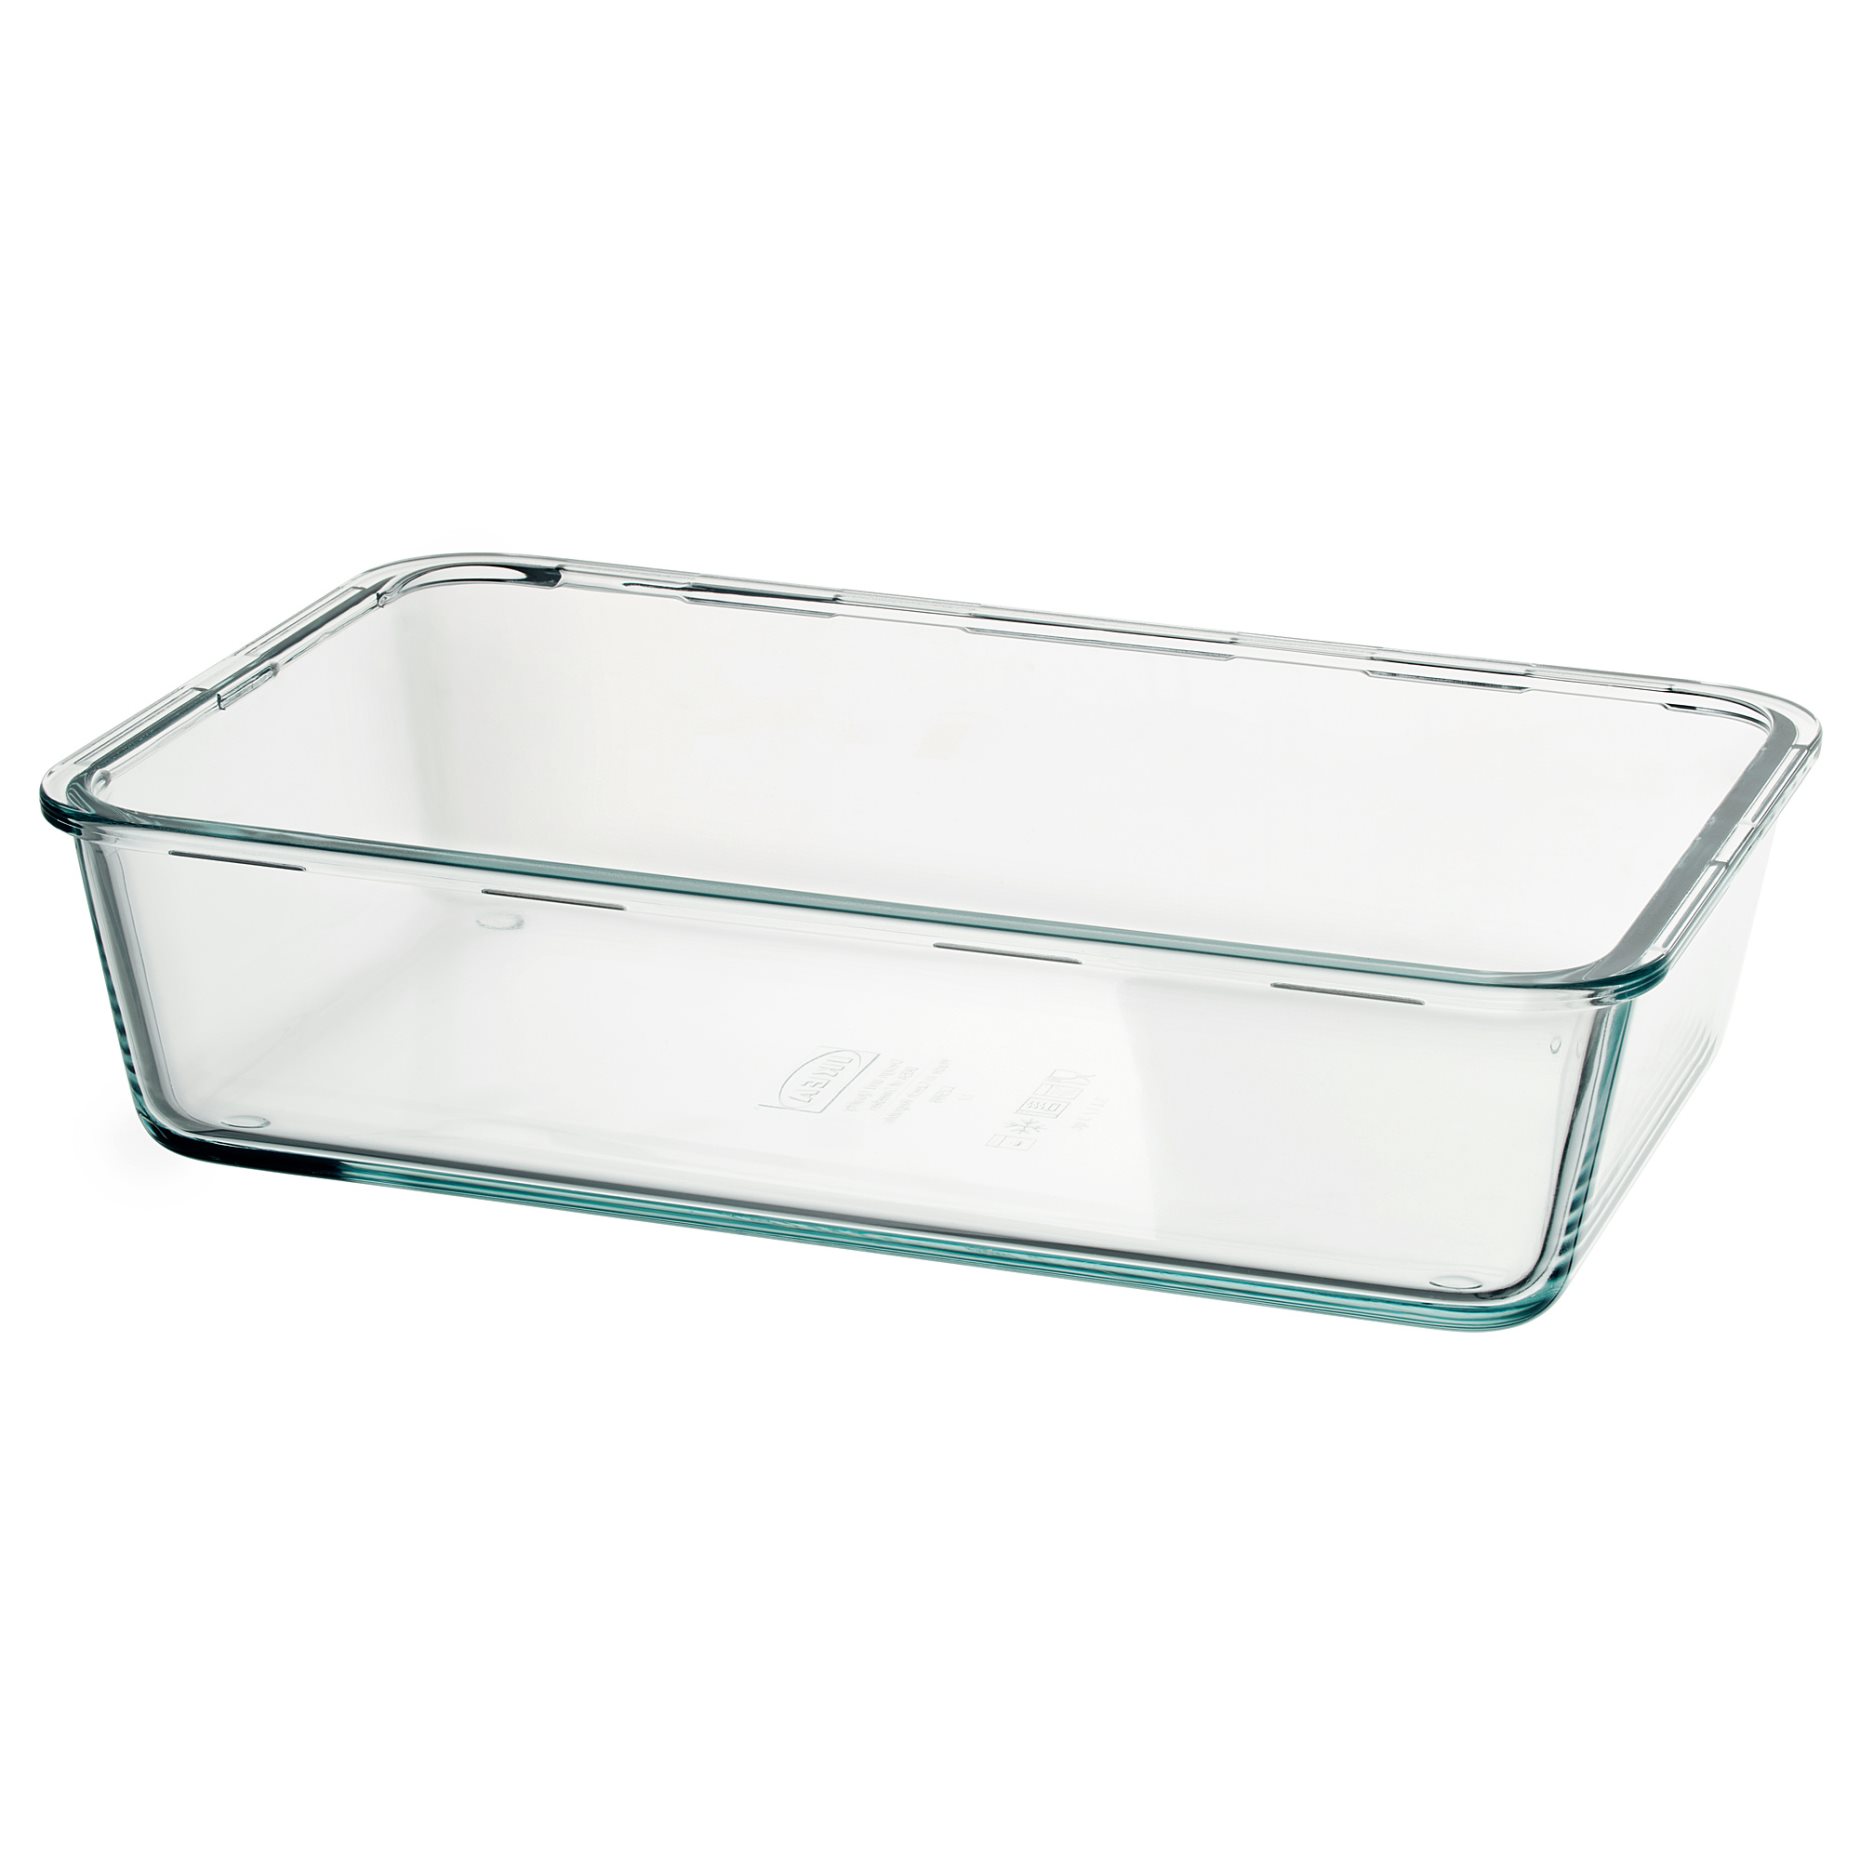 IKEA 365+, food container large rectangular/glass, 3.1 l, 803.931.31